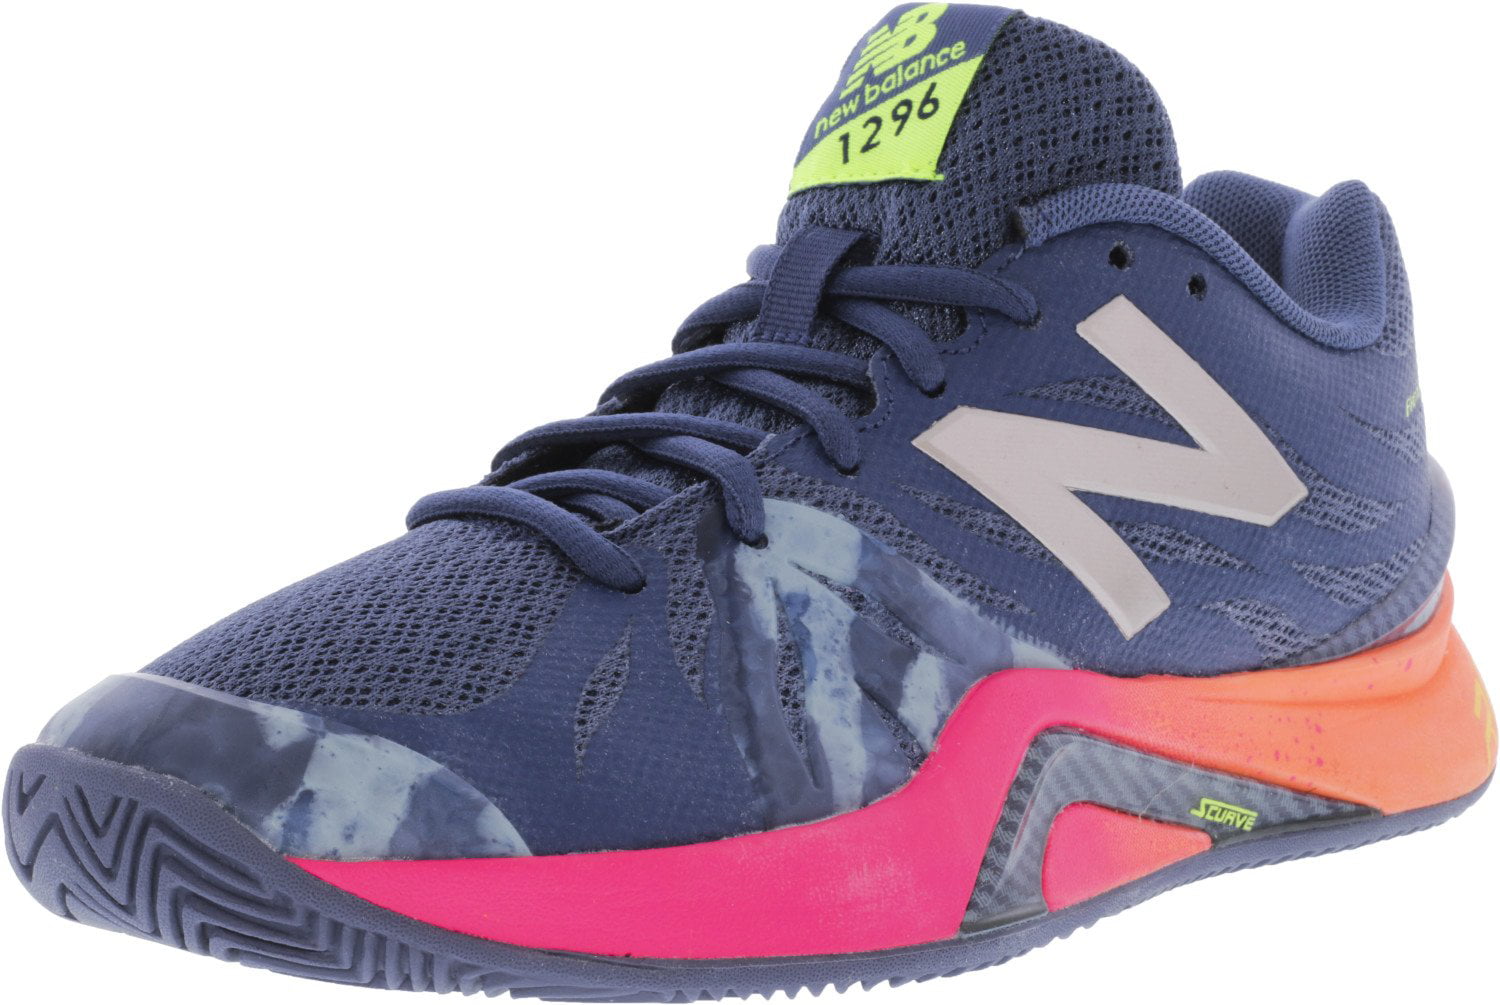 New Balance Women's Wc1296 N2 Ankle 